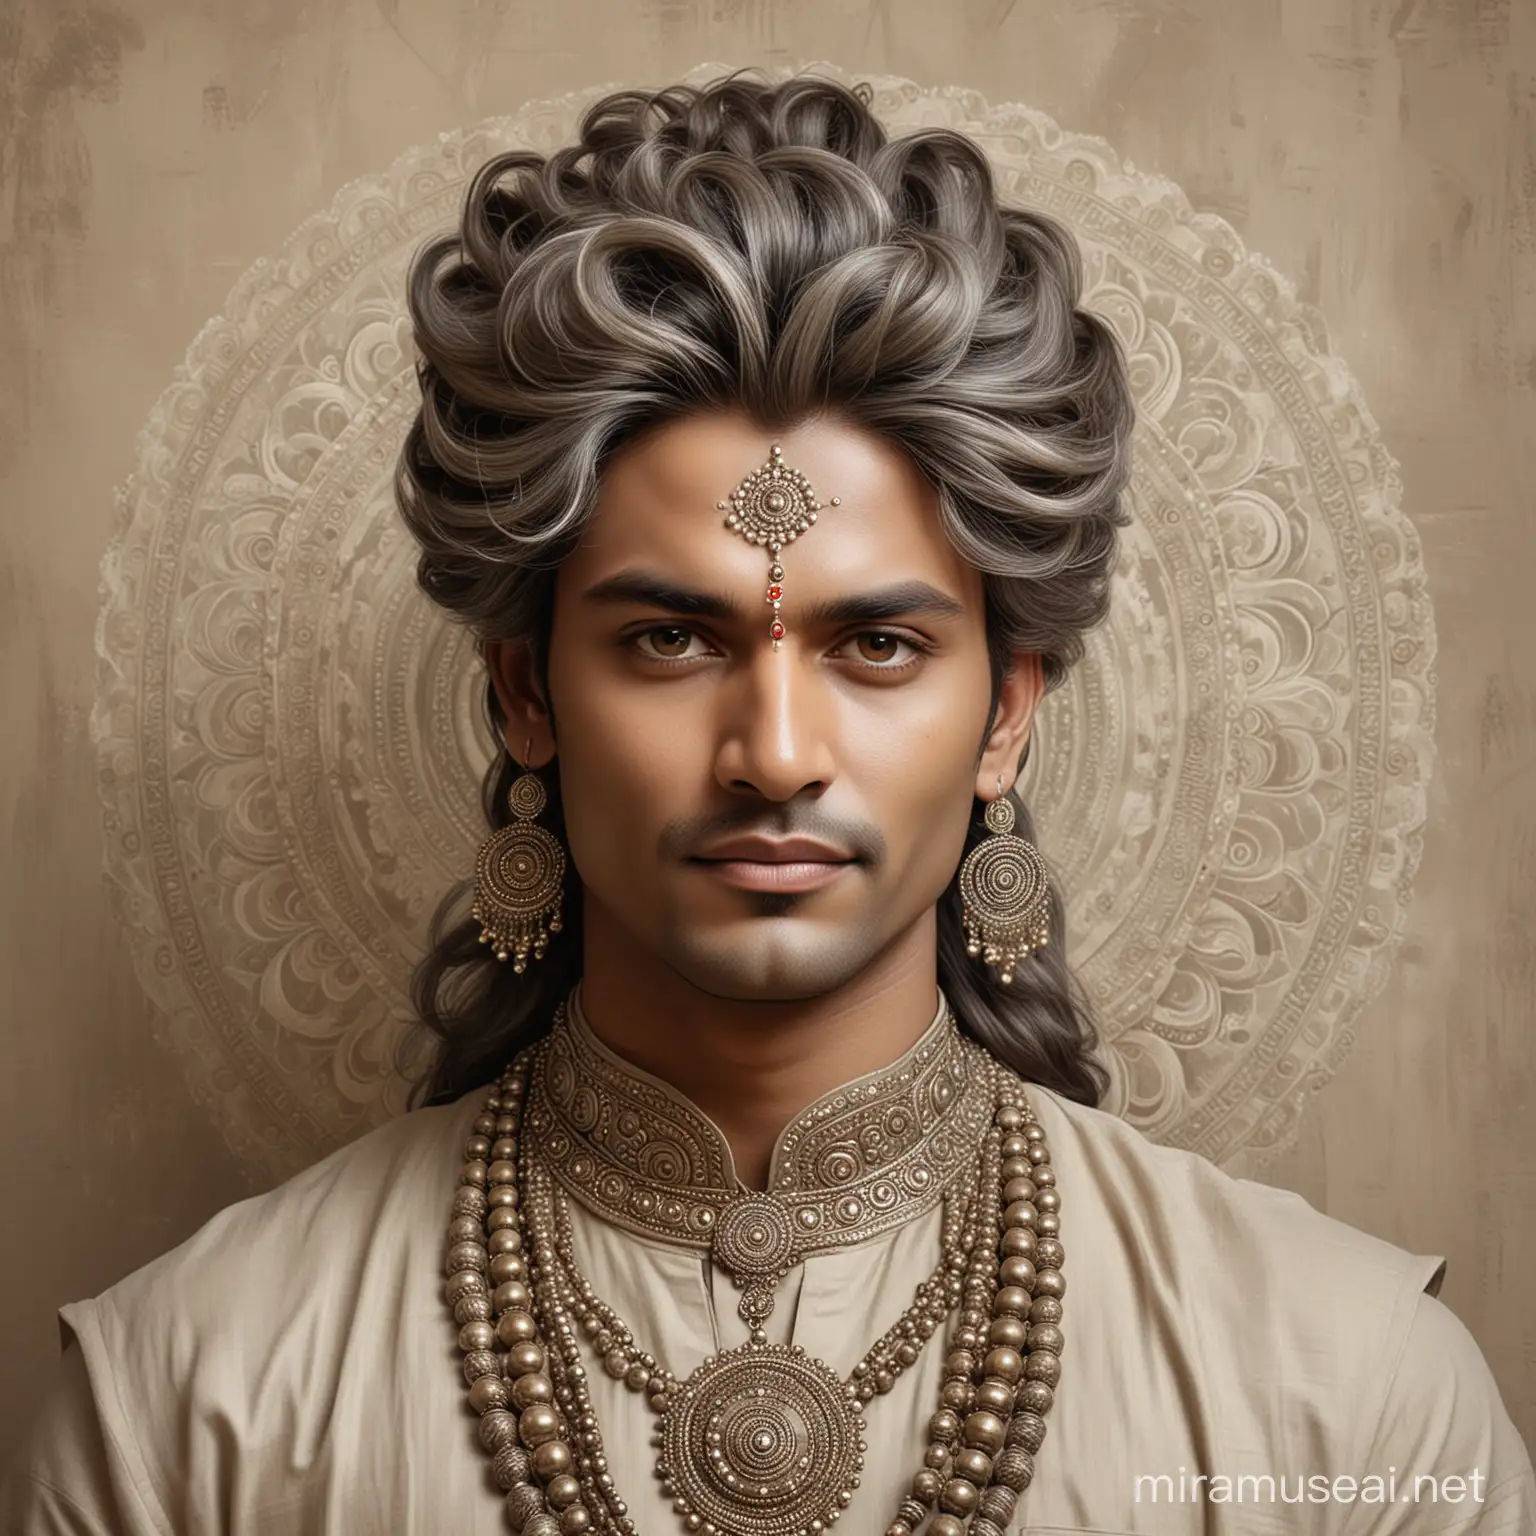 Mature Male Deity in EarthToned Robes with Luxurious Indian Hairstyle